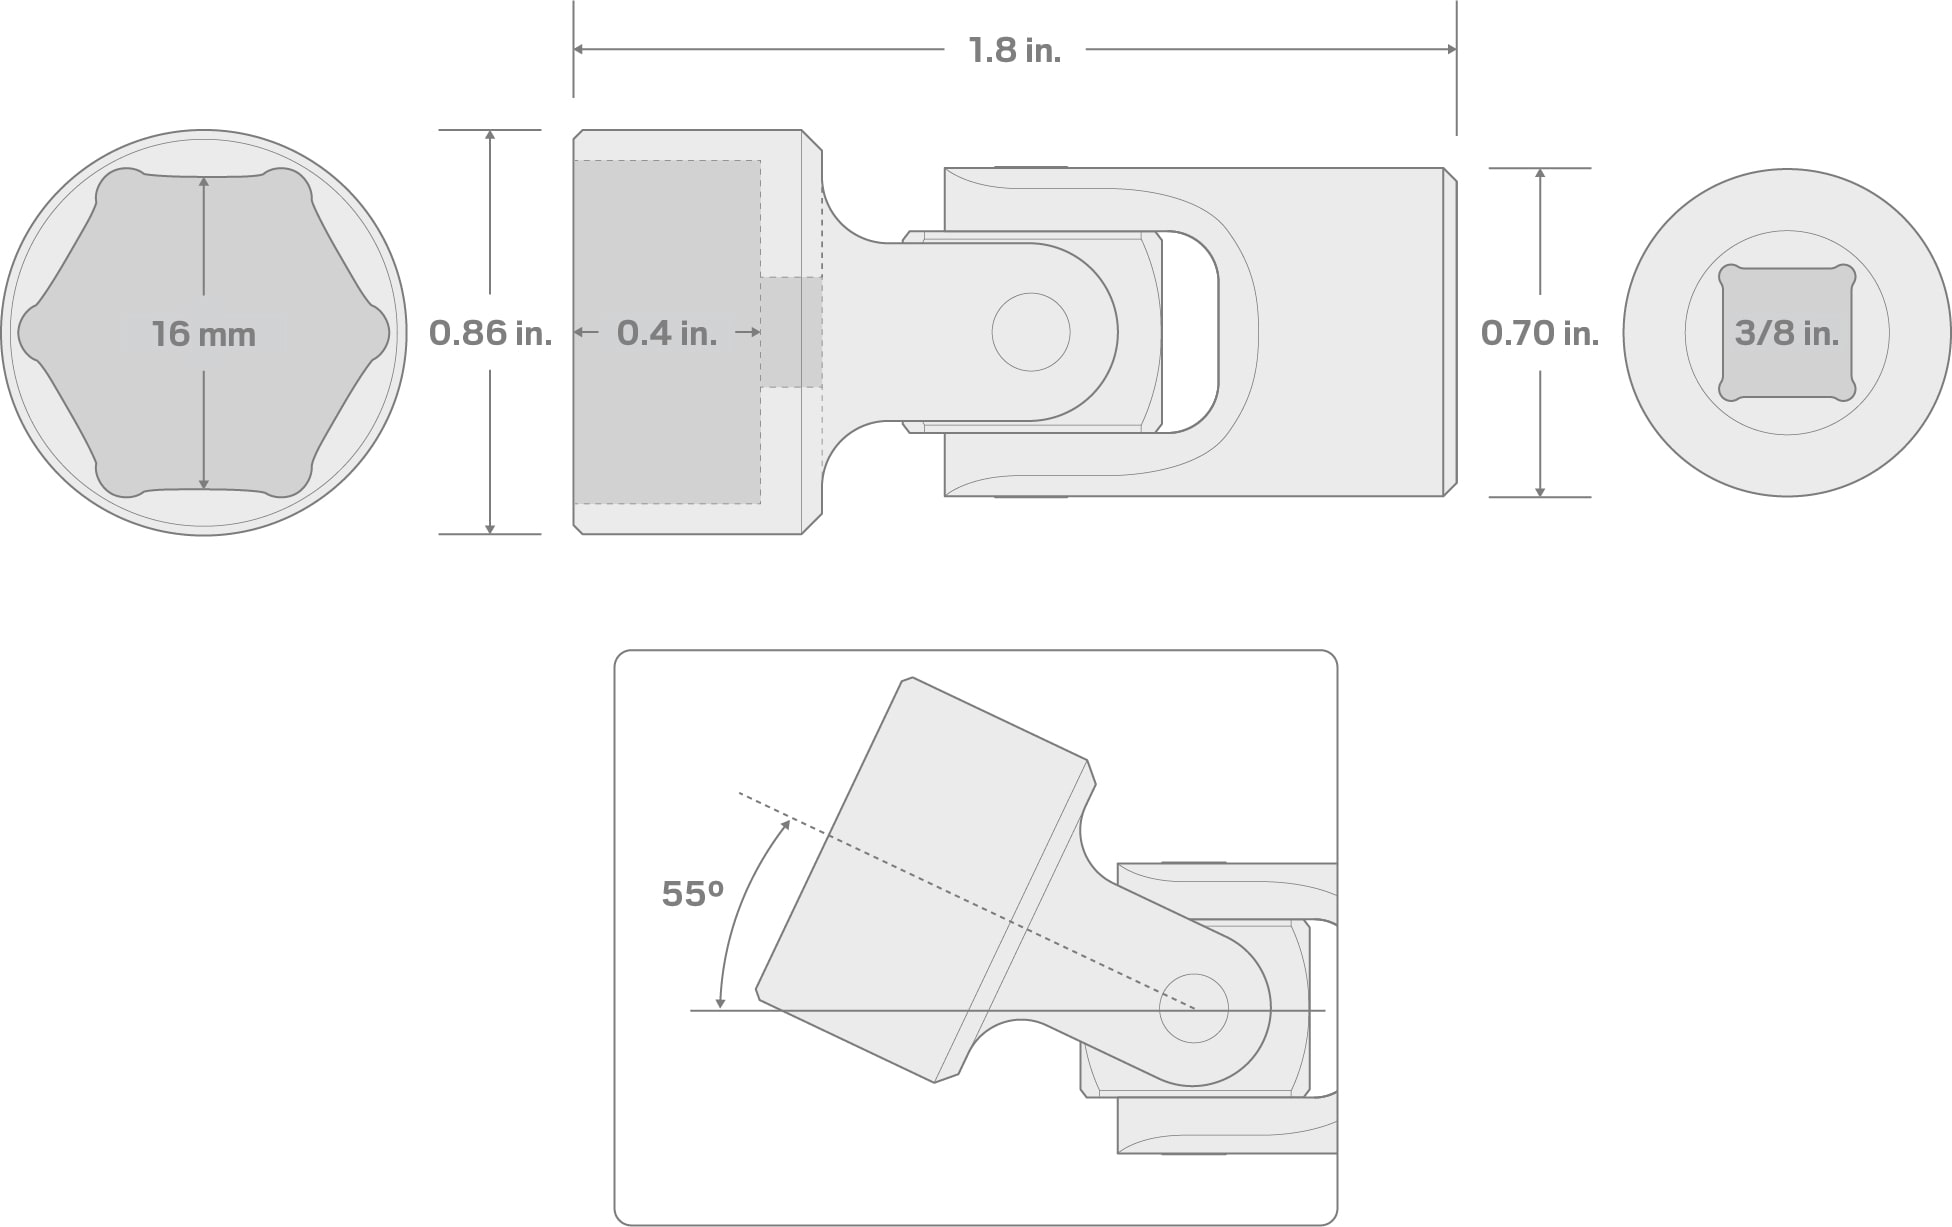 Specs for 3/8 Inch Drive x 16 mm Universal Joint Socket